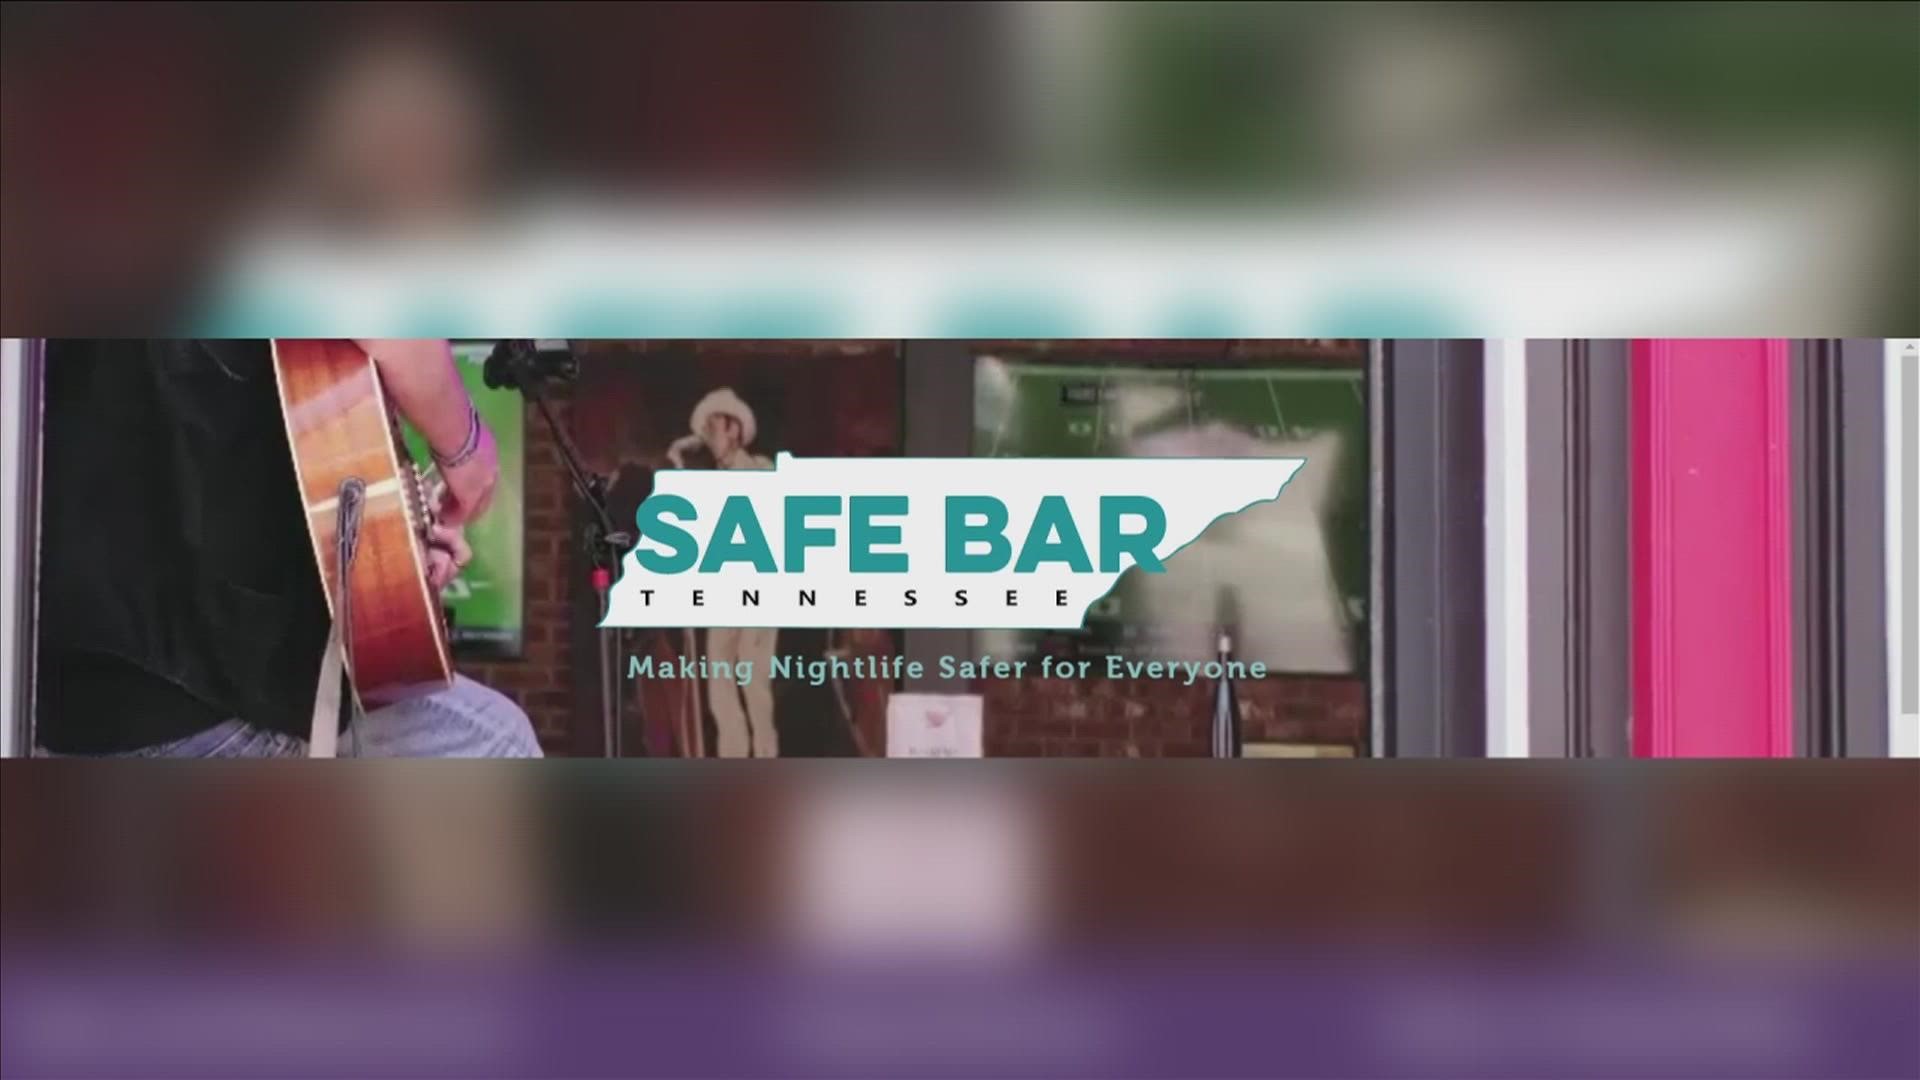 The Safe Bar initiative provides sexual harassment training for staff members at local bars, helping them recognize harassment more quickly and keep customers safe.